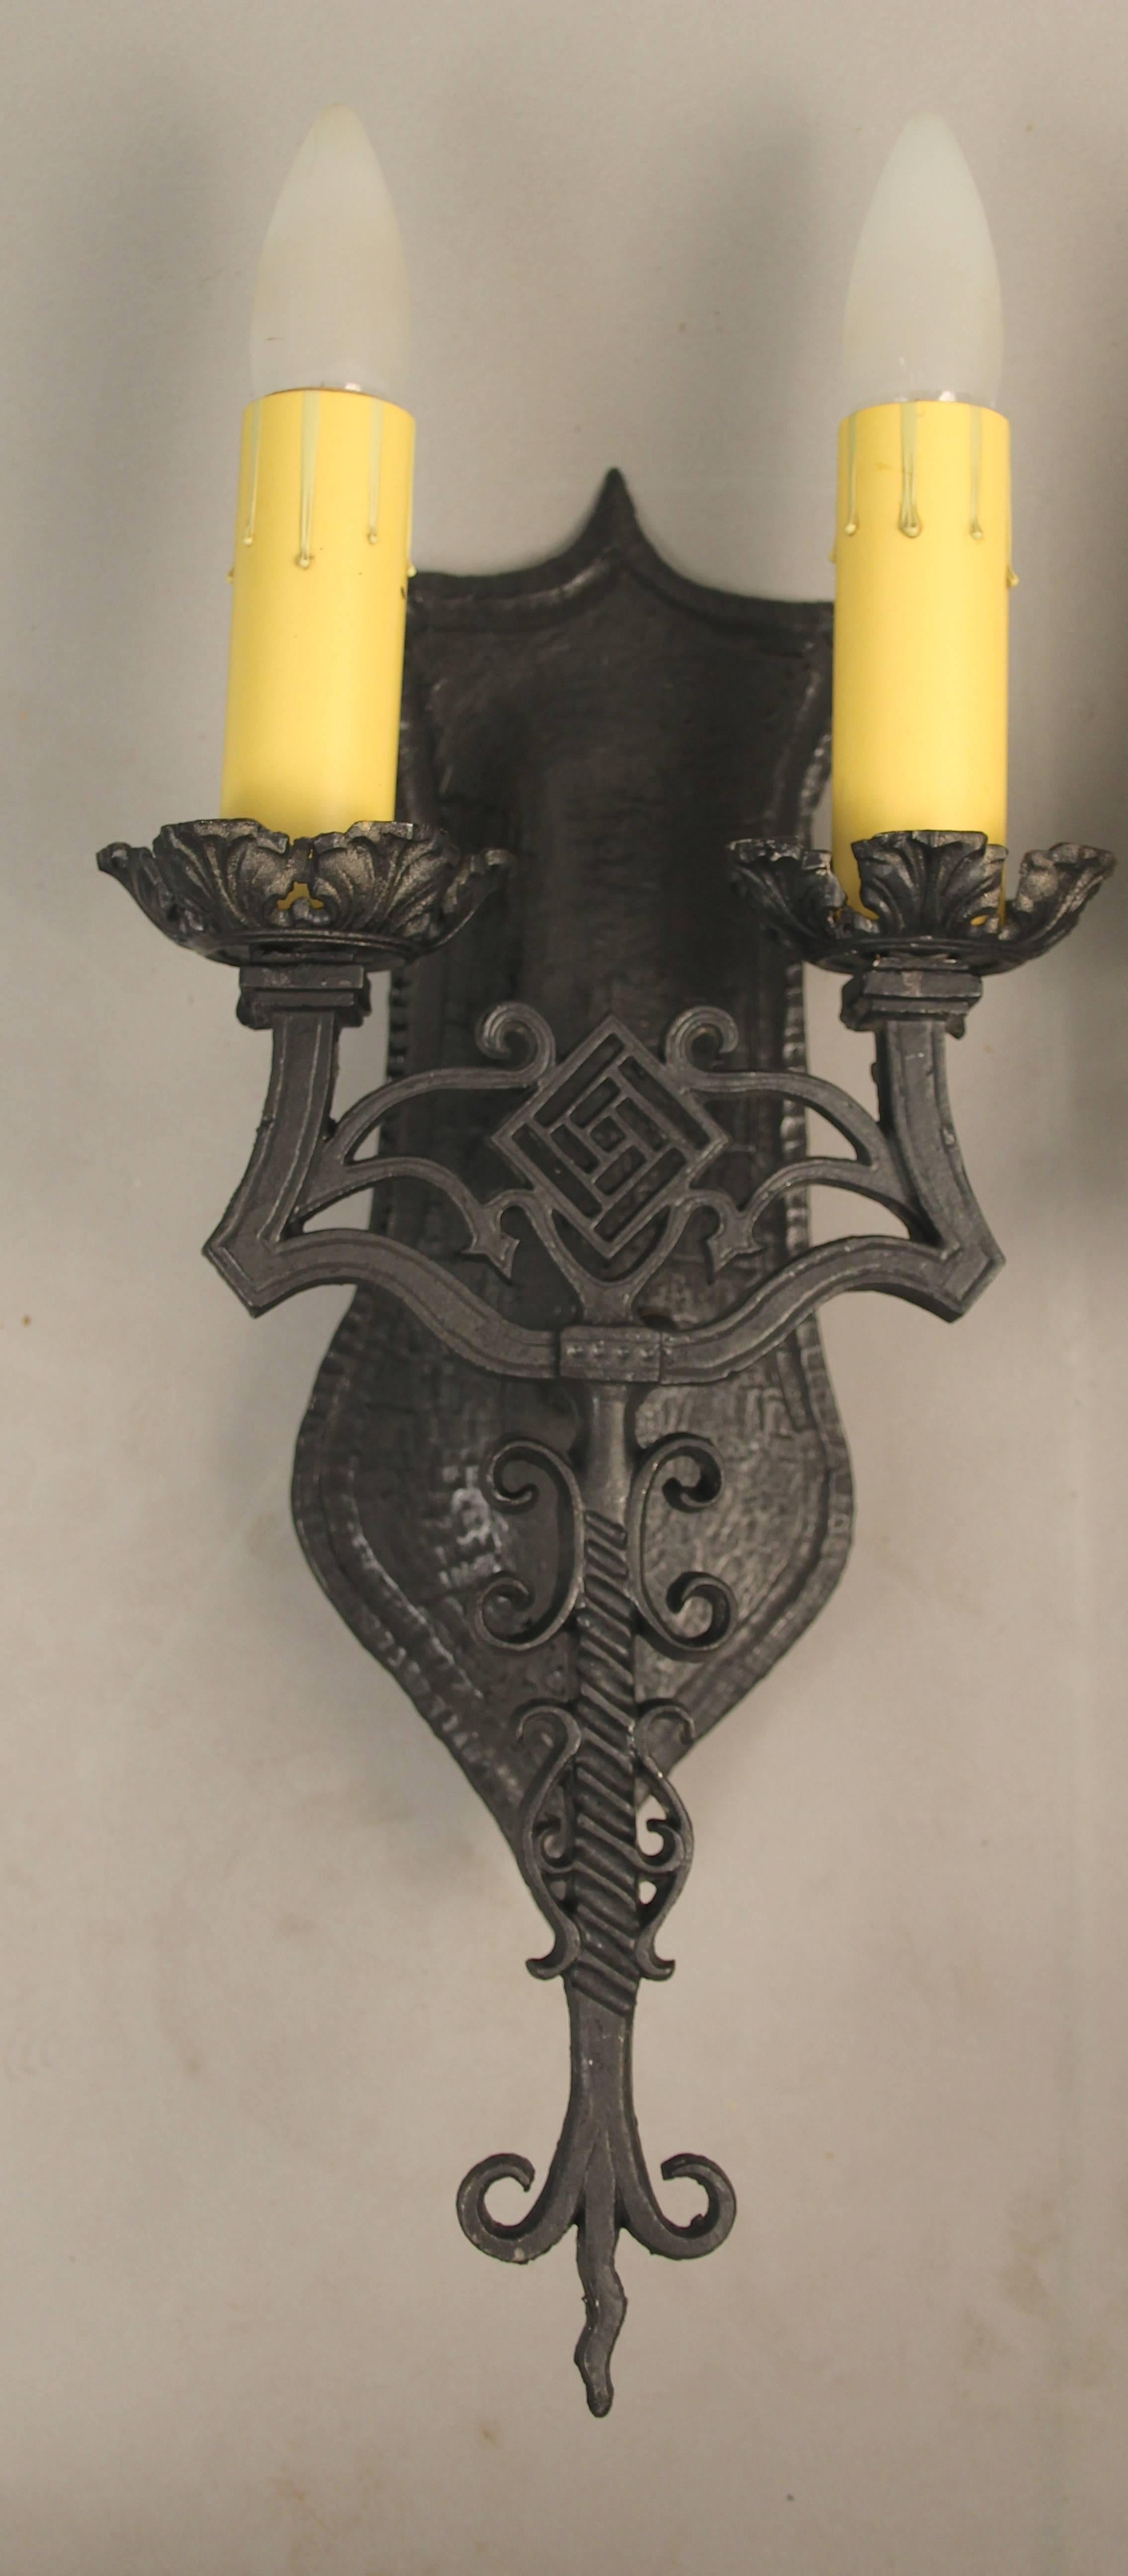 Pair of double sconces with attractive filigree pattern, circa 1920s.